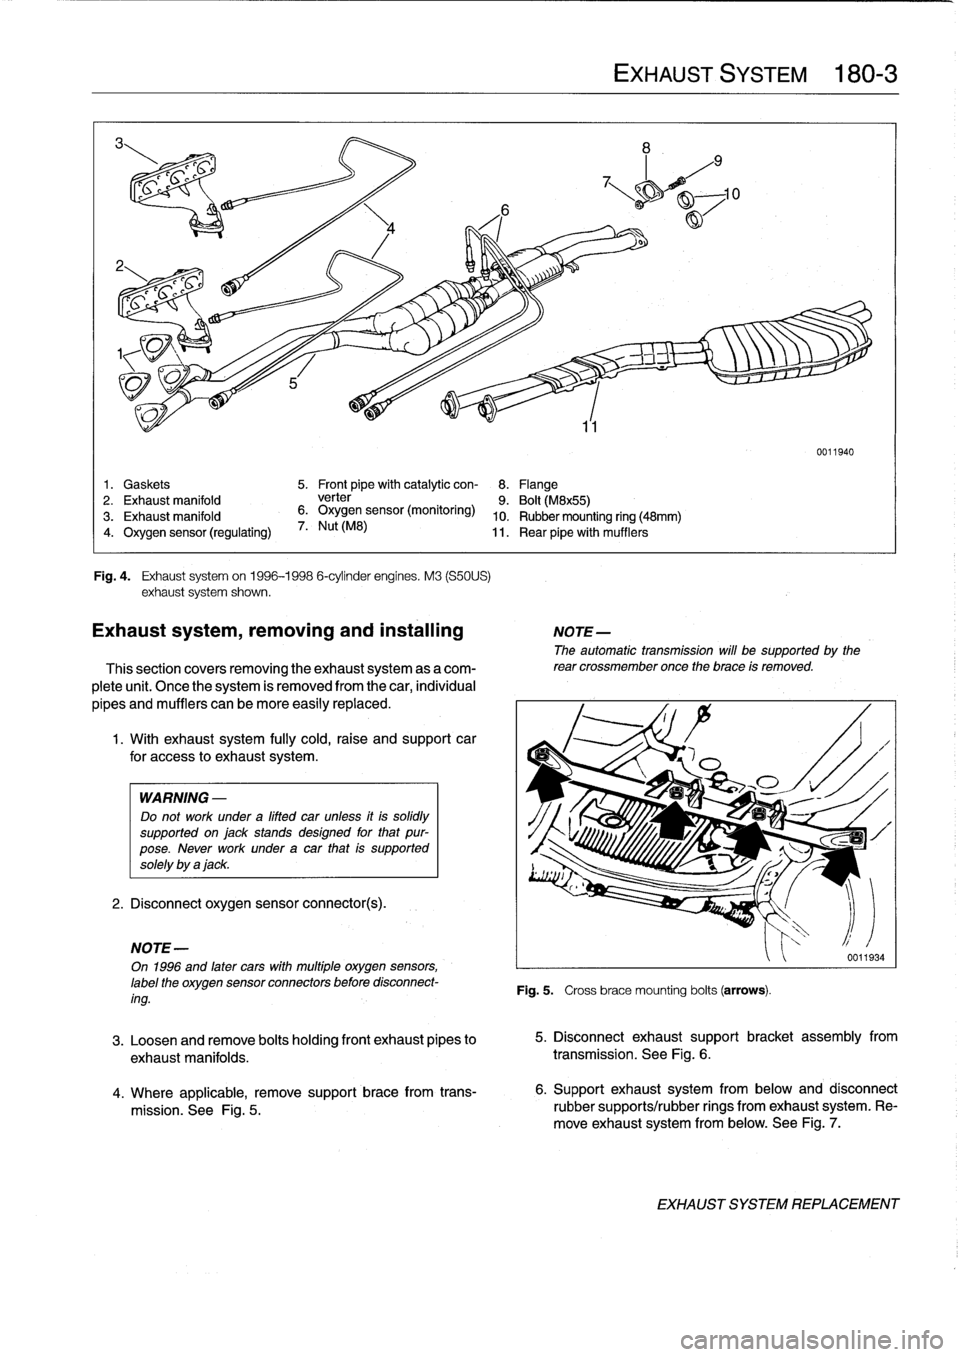 BMW 325i 1994 E36 Owners Manual 
1
.

	

Gaskets

	

5
.

	

Front
pipe
with
catalytic
con-

	

8
.

	

Flange
2
.

	

Exhaust
manifold

	

verter

	

9
.

	

Bolt
(M8x55)

3
.
Exhaust
manifold

	

6
.
Oxygen
sensor
(monitoring)

	
